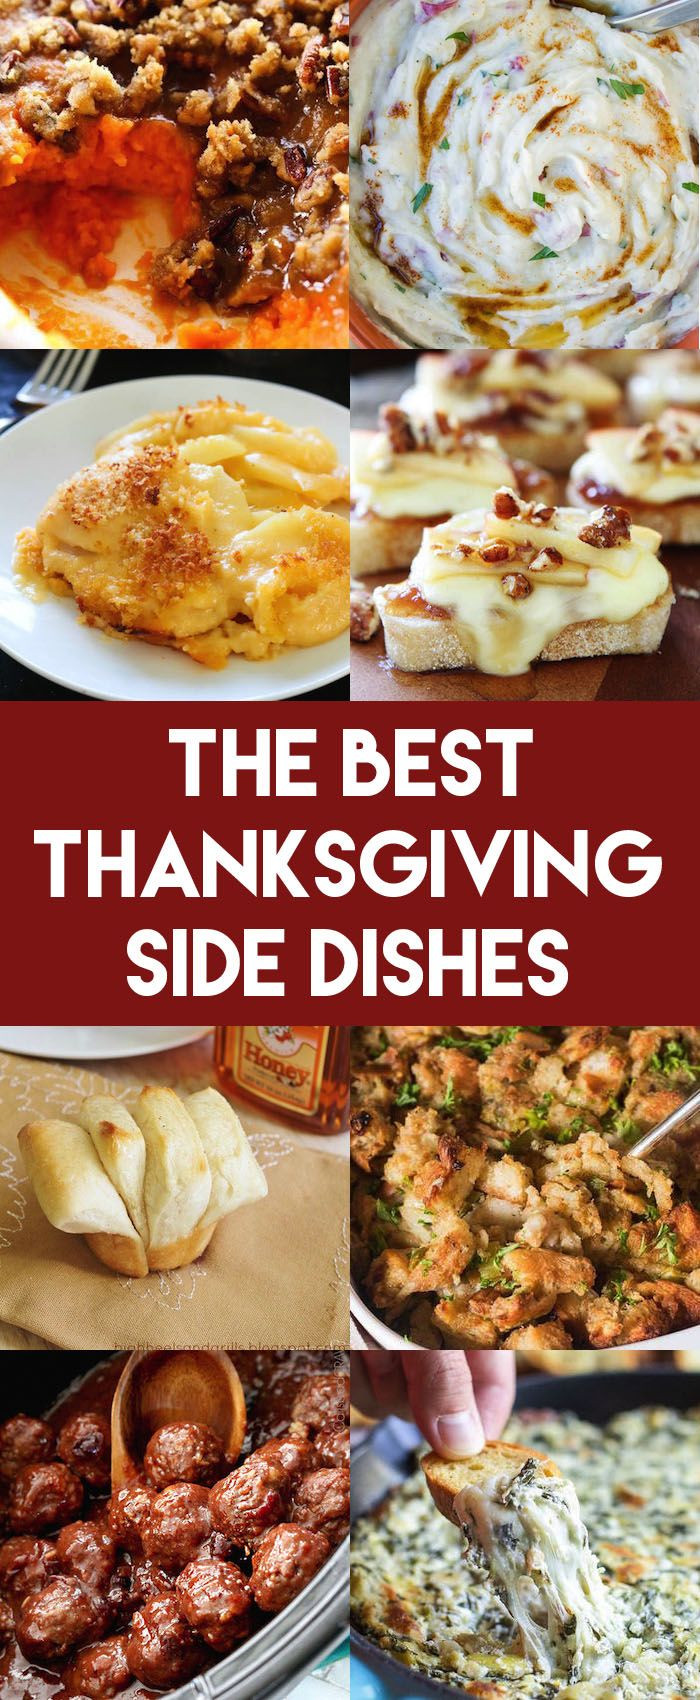 The Best Thanksgiving Side Dishes
 Best 25 Thanksgiving recipes ideas on Pinterest